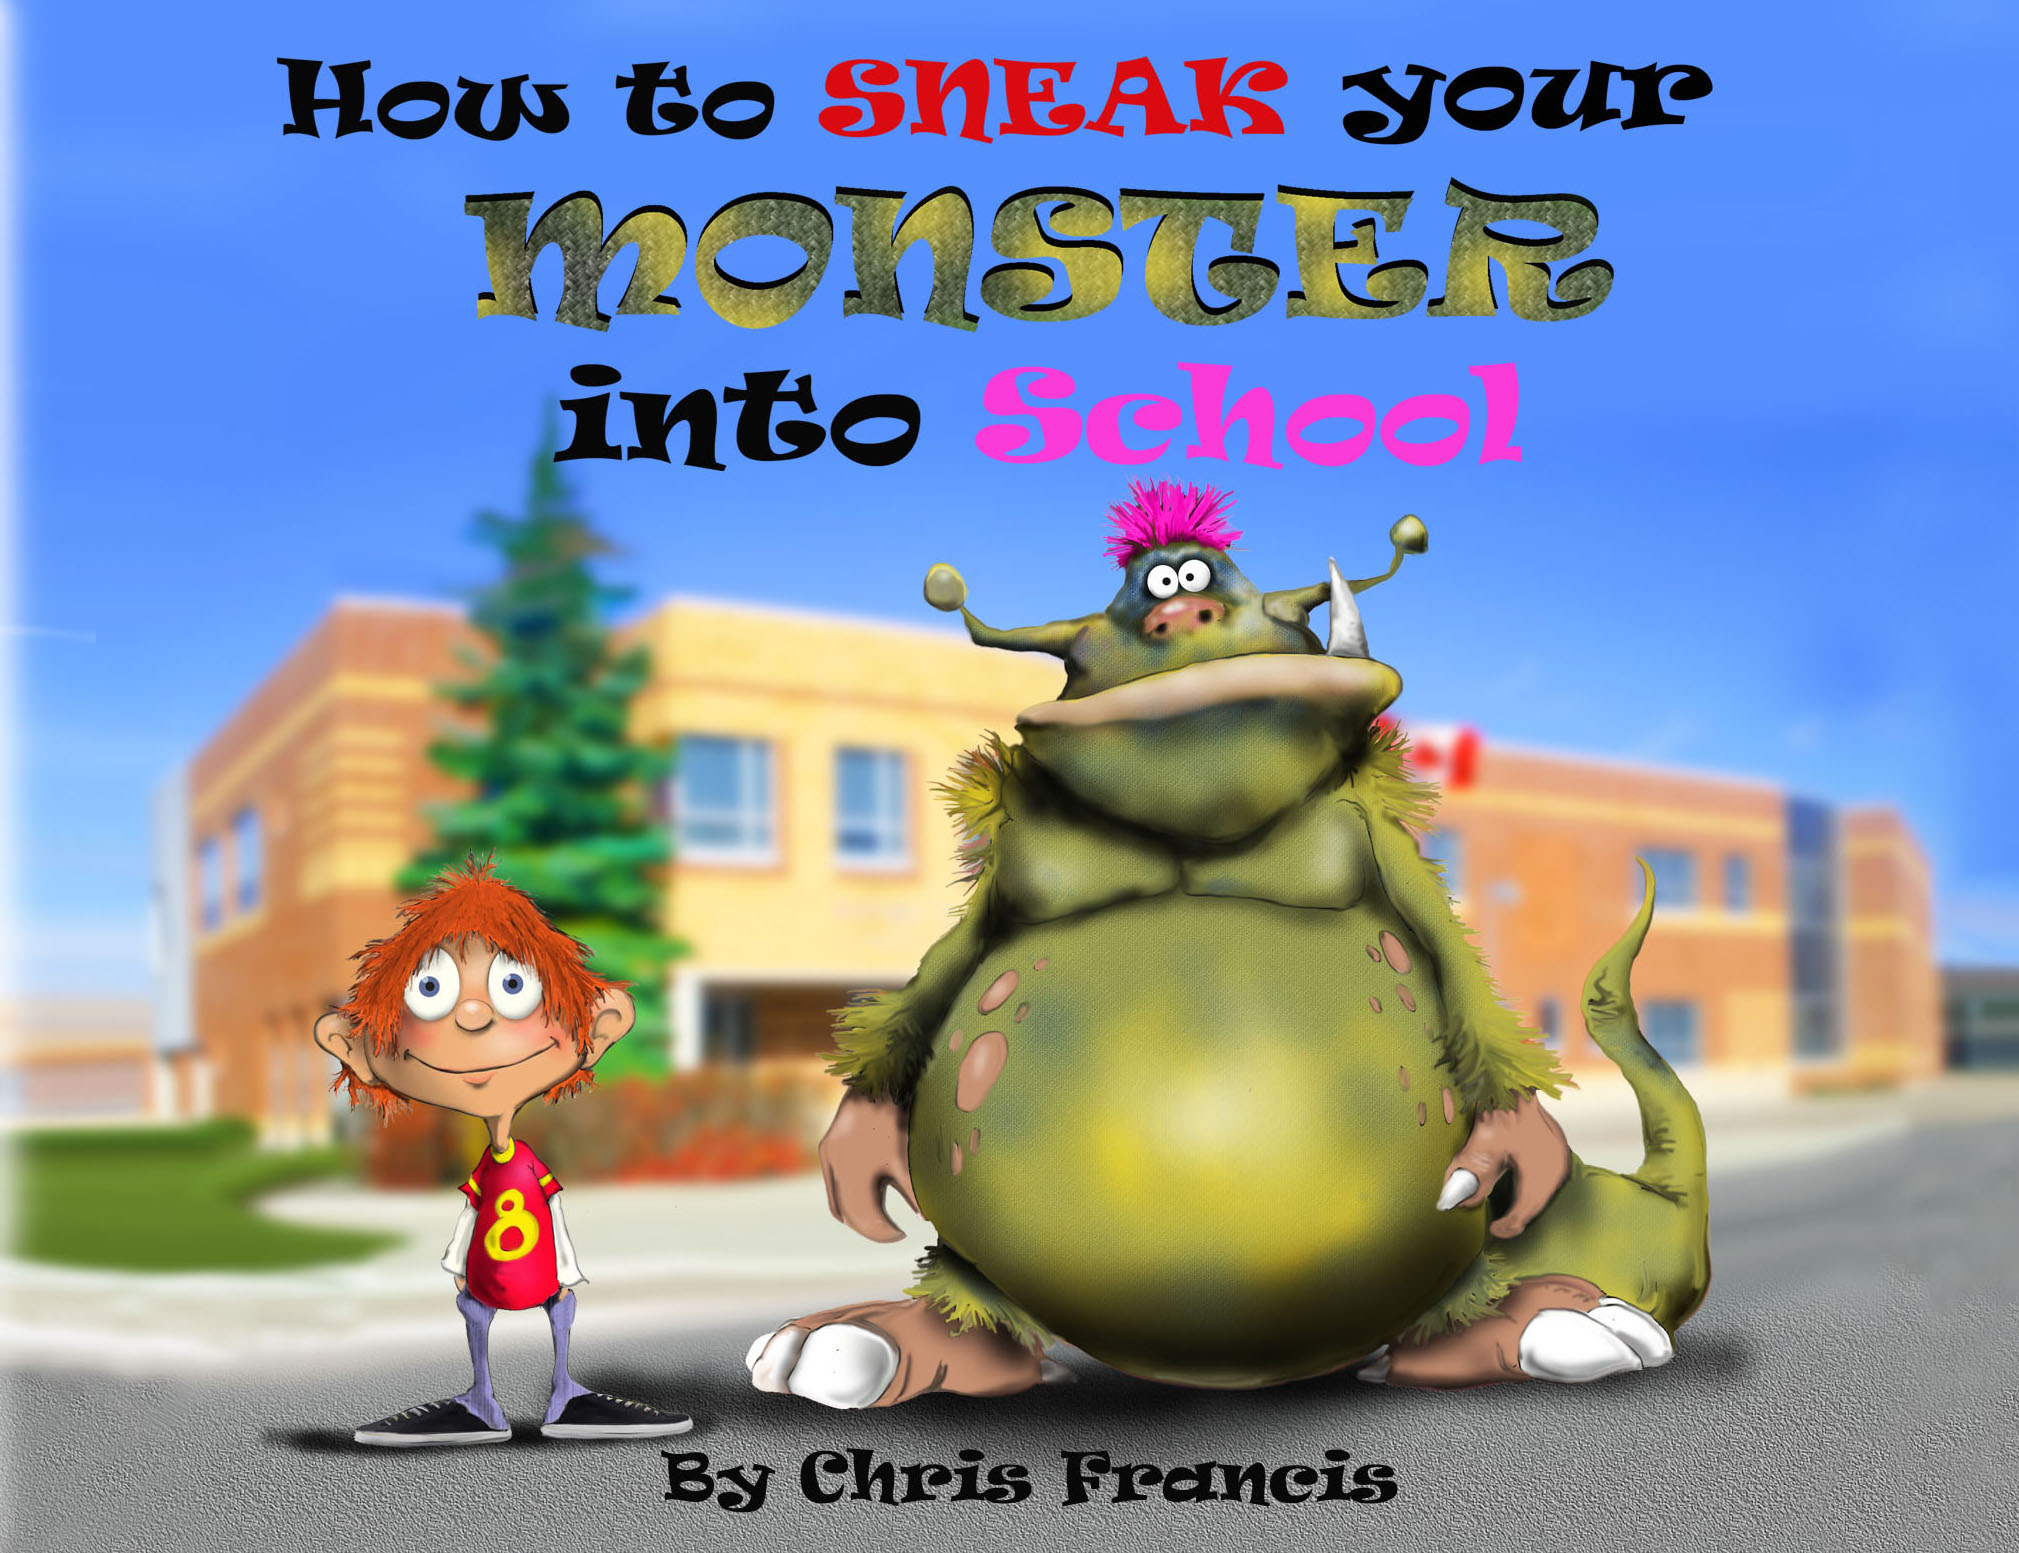 PROCEDURAL WRITING: How to Sneak your Monster into School